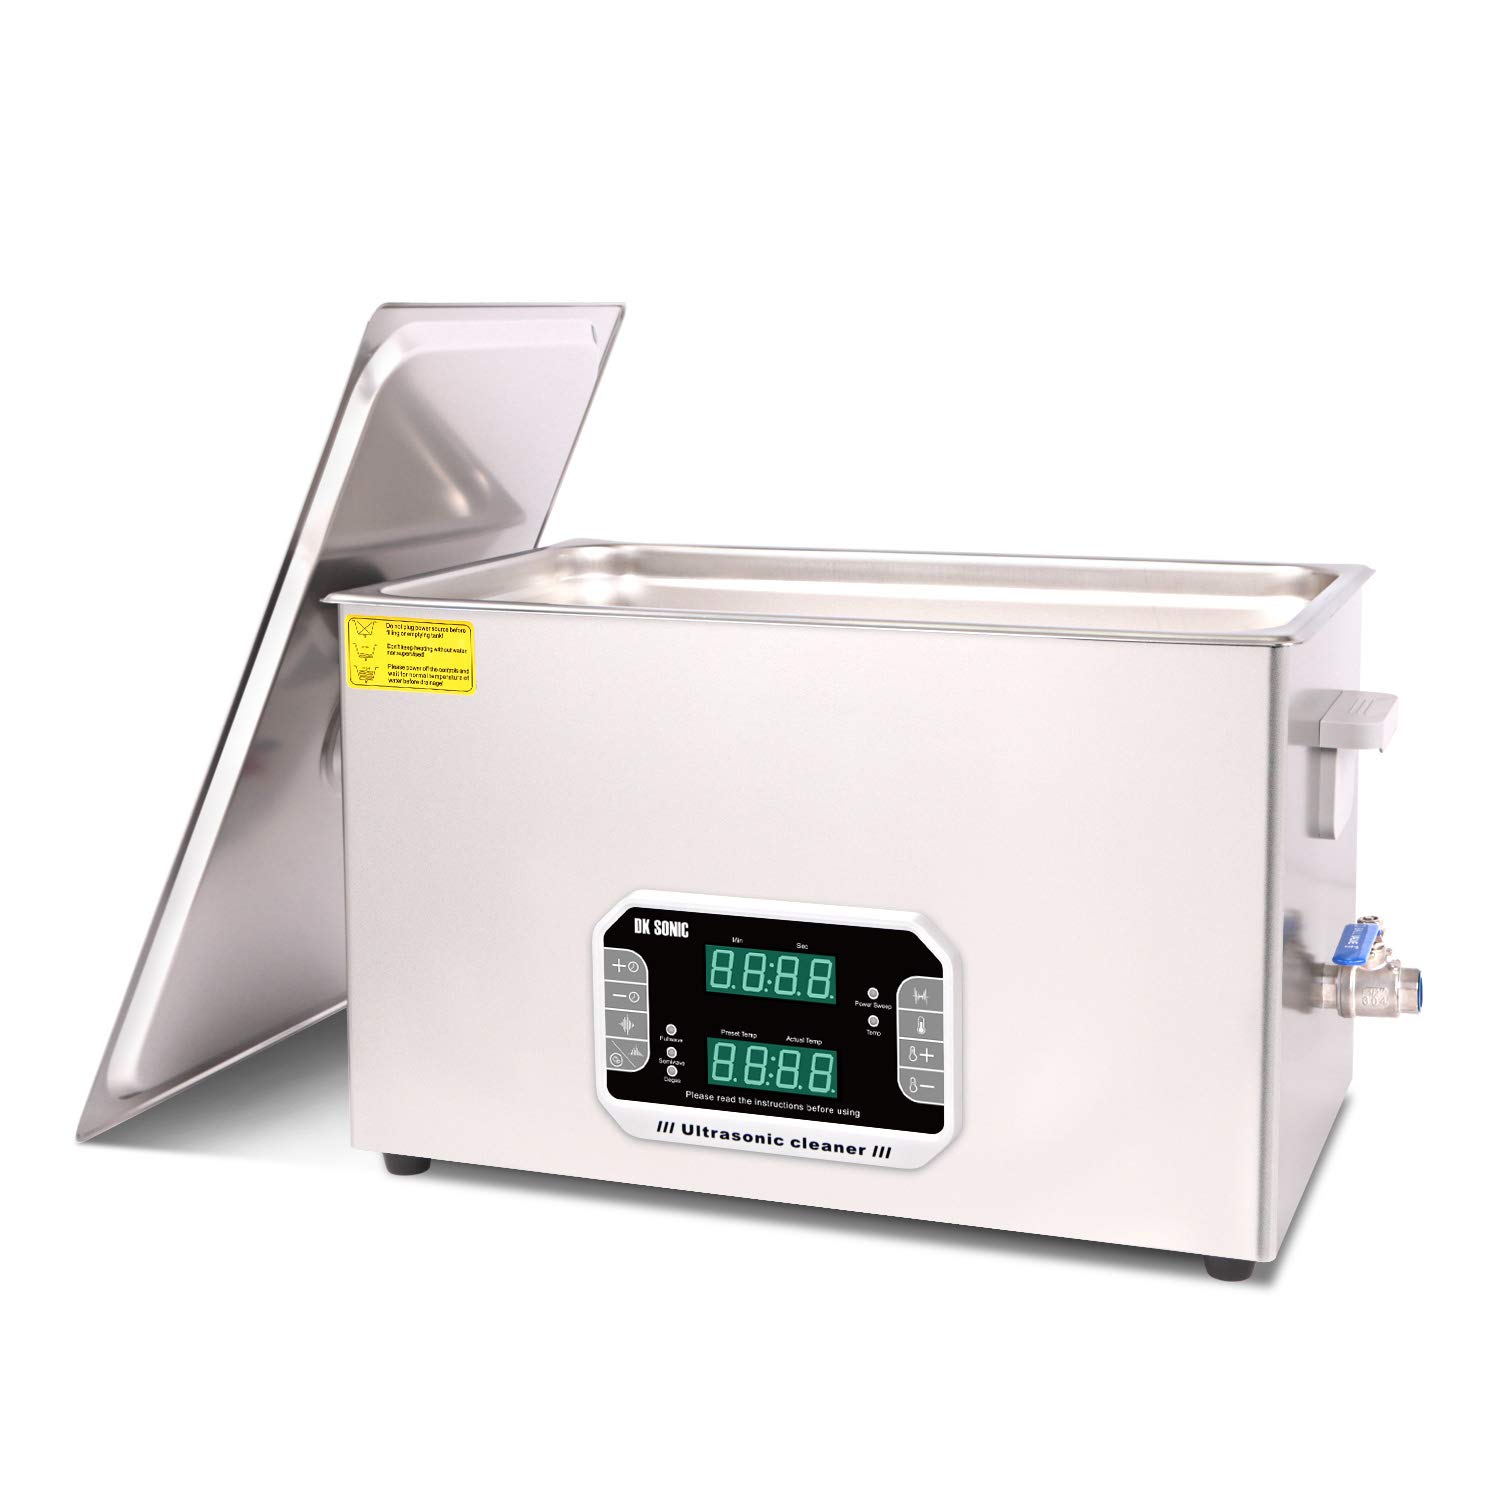 DK Sonic Ultrasonic Cleaning Machine - Cobra Surgical Supplies